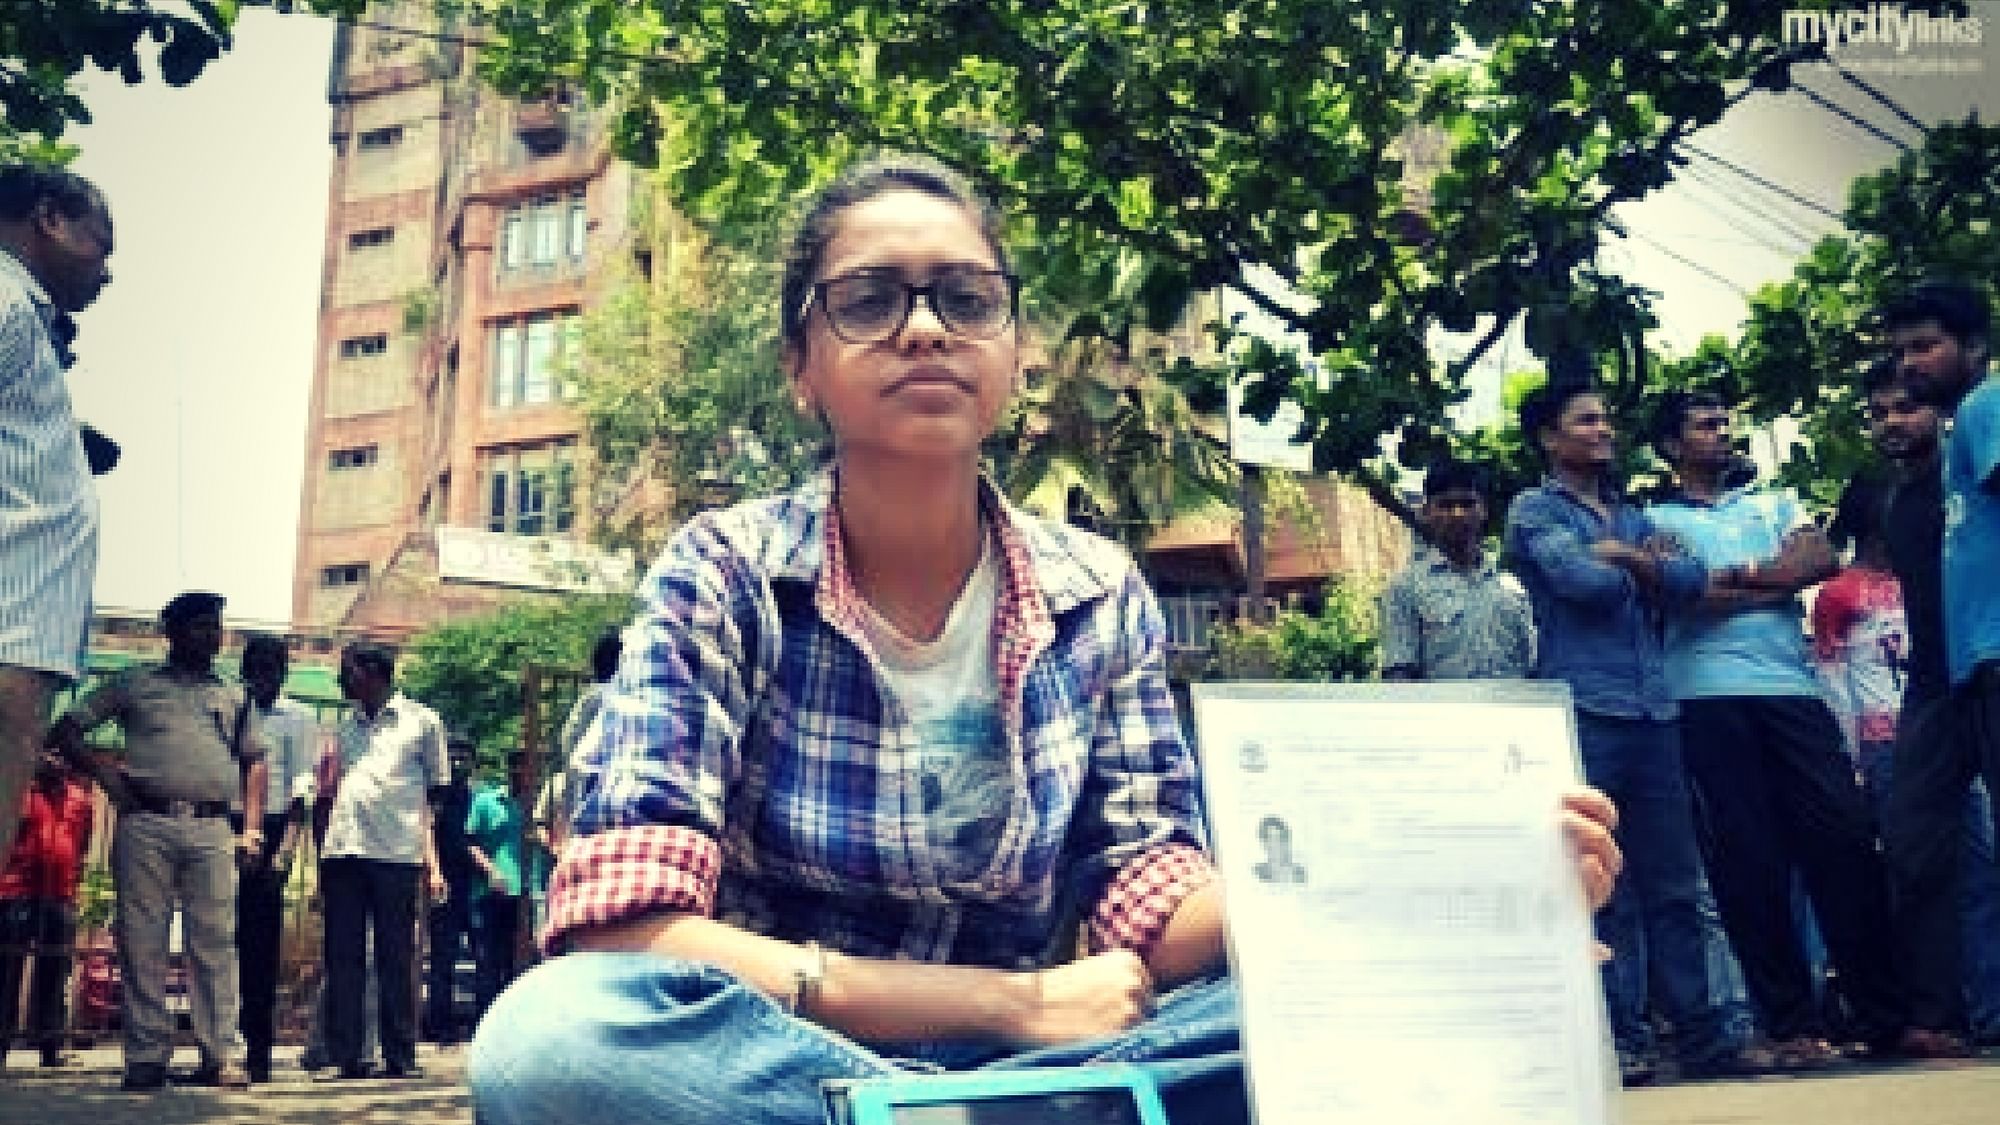 The author sitting in front of the CBSE office.